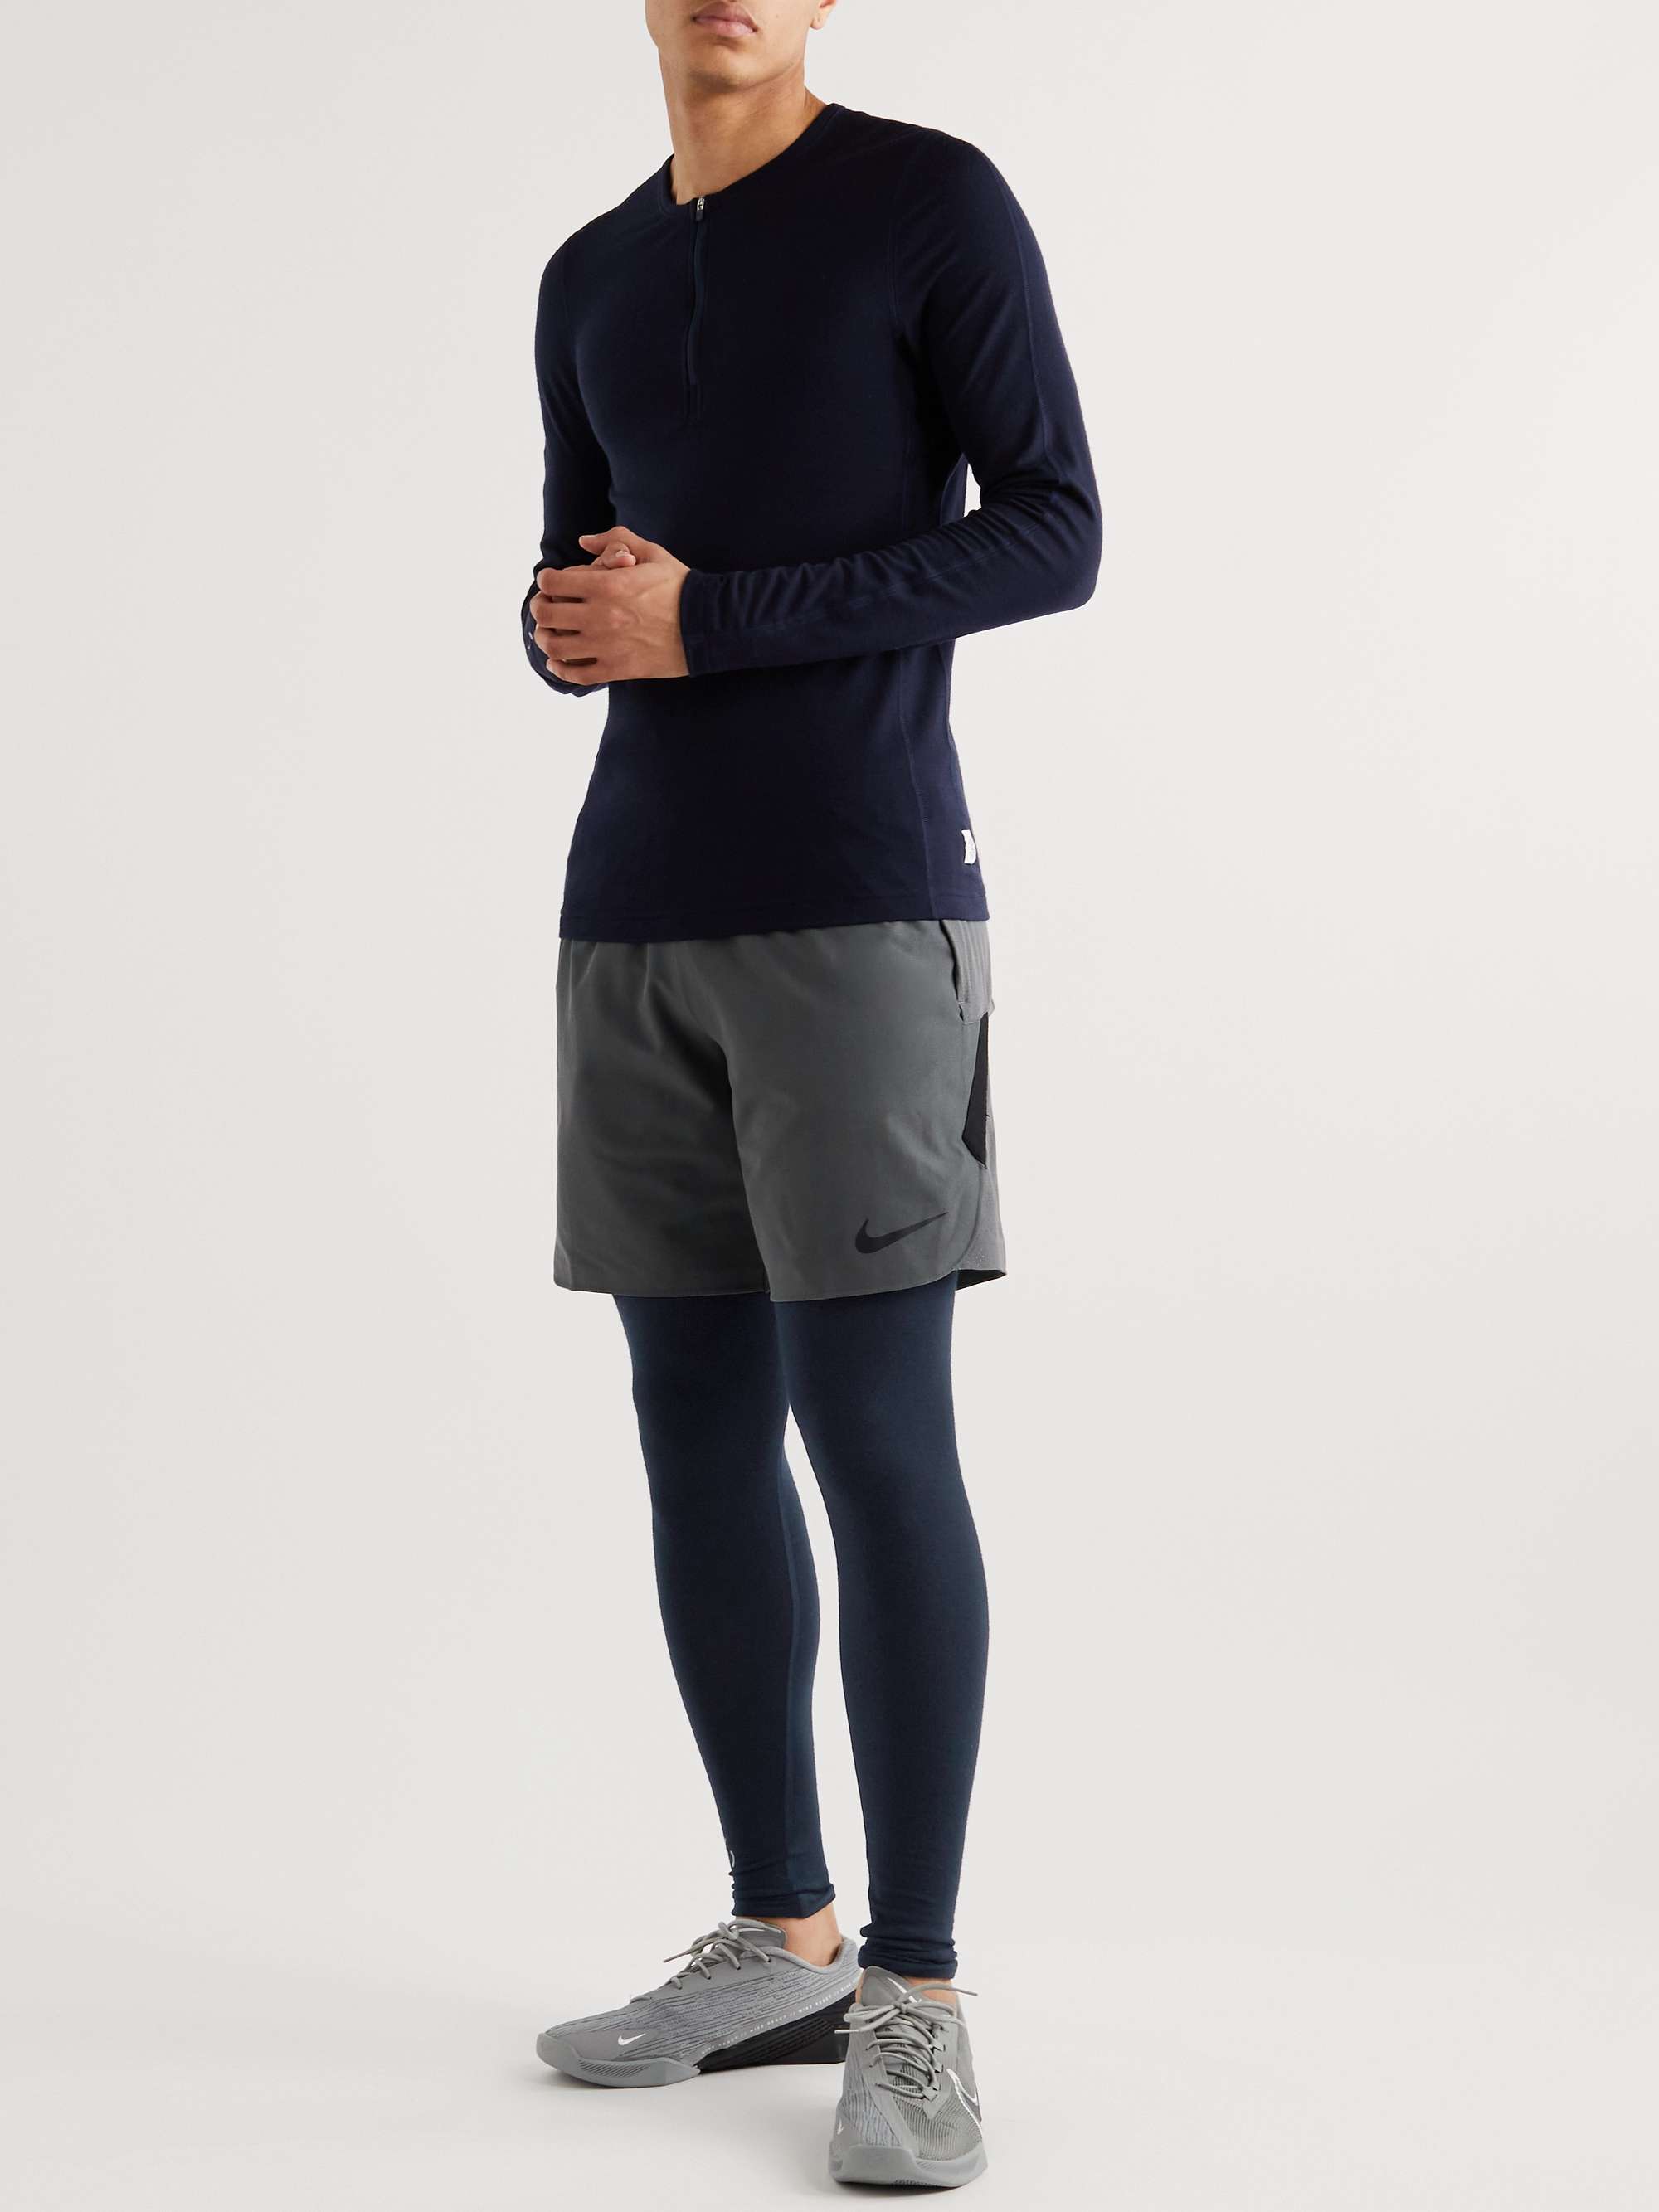 REIGNING CHAMP + Ryan Willms Merino Wool-Blend Jersey Compression Tights